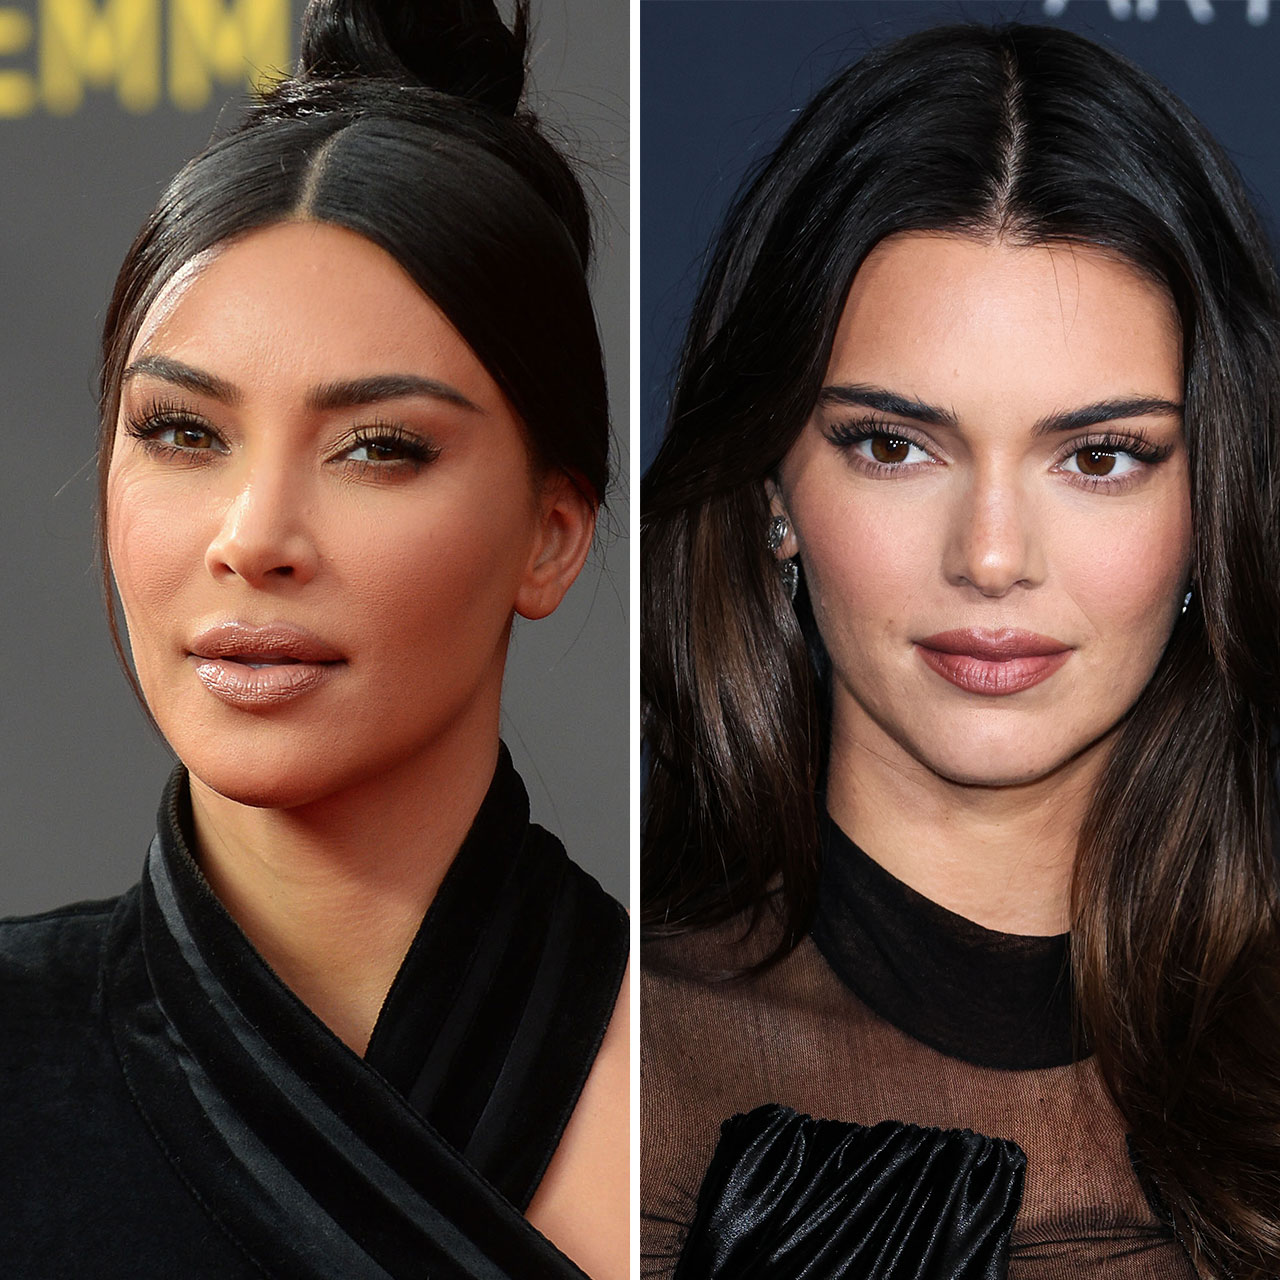 Kendall Jenner And Kim Kardashian Step Out In Matching Black Bodycon Dresses  For Justin Timberlake Concert - SHEfinds